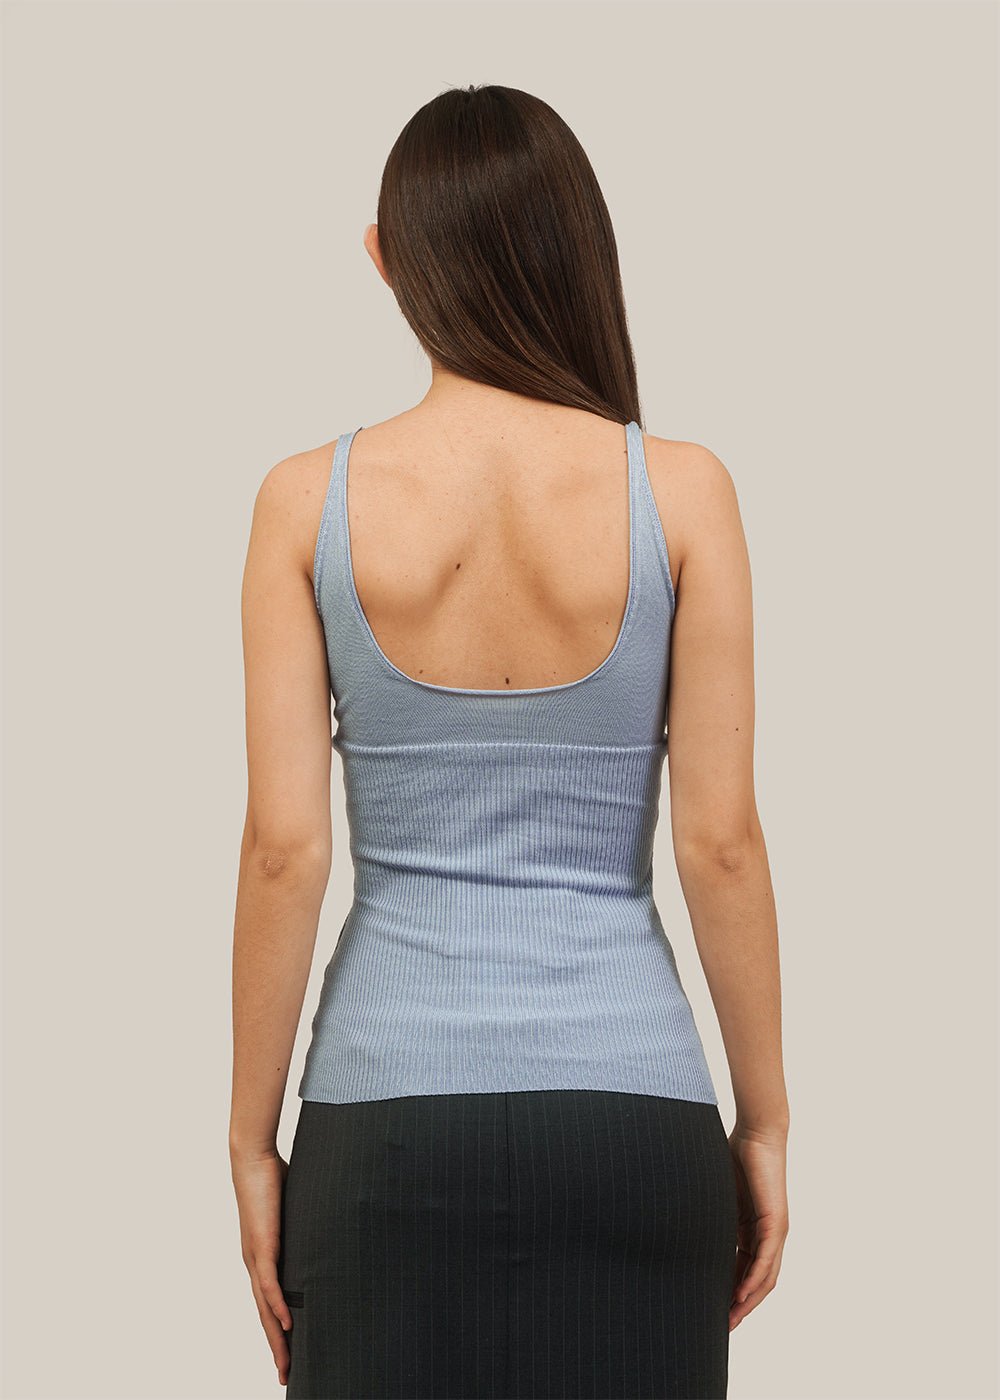 Che Tank Top in Light Blue by PALOMA WOOL – New Classics Studios